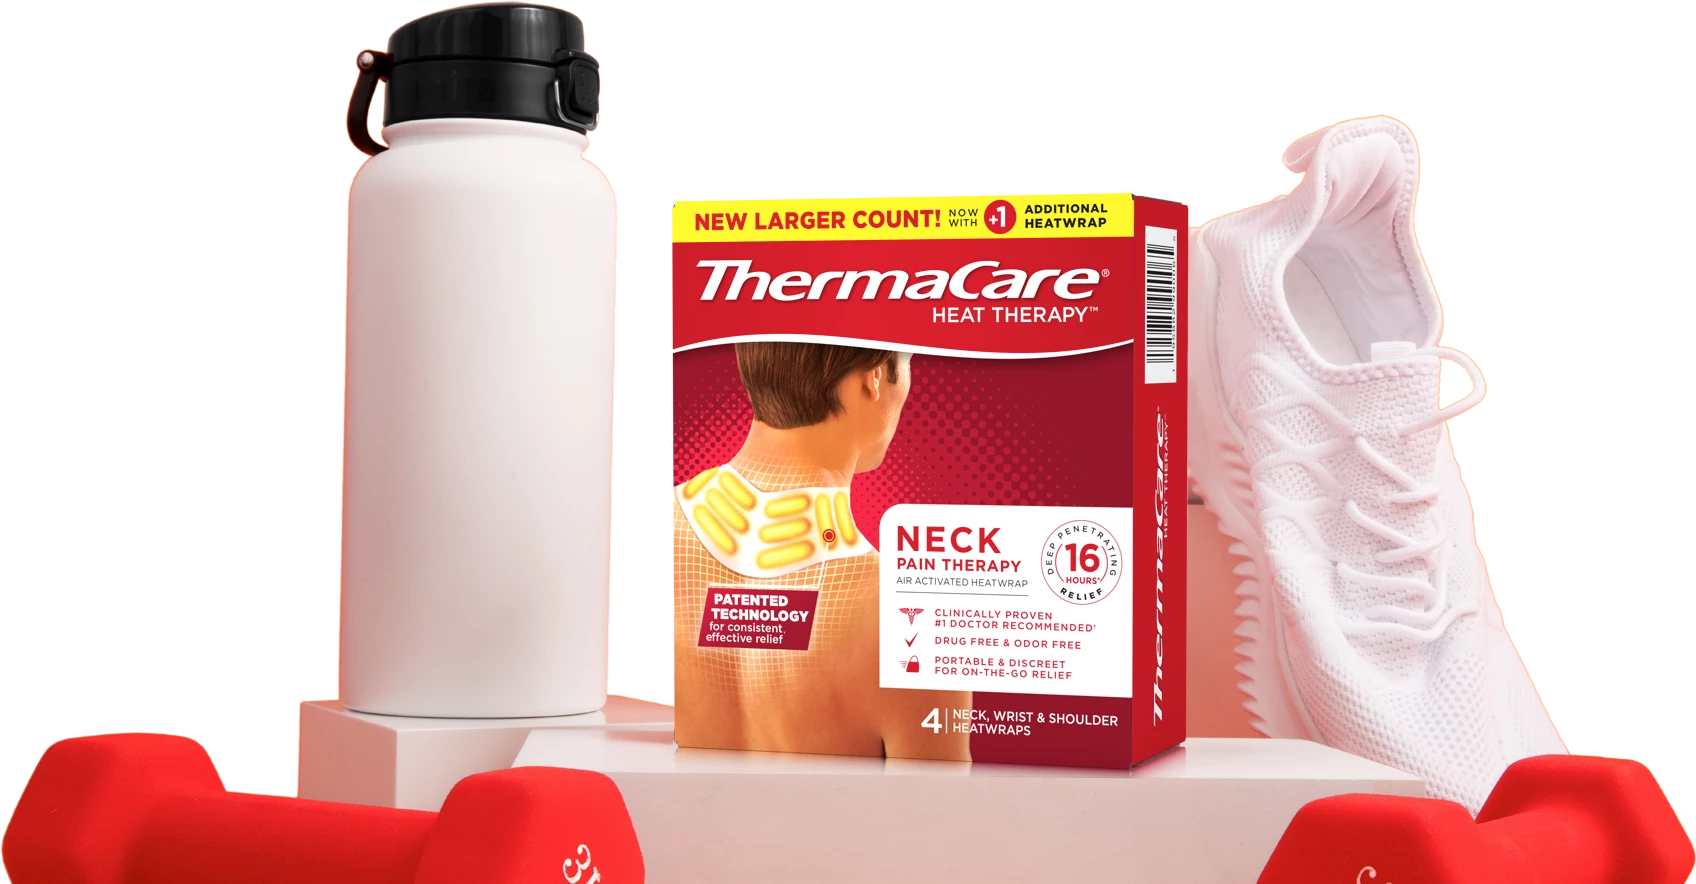 https://www.thermacare.com/wp-content/themes/thermacare/img/bg-cta-neck-pain-therapy-new.webp?v2.1